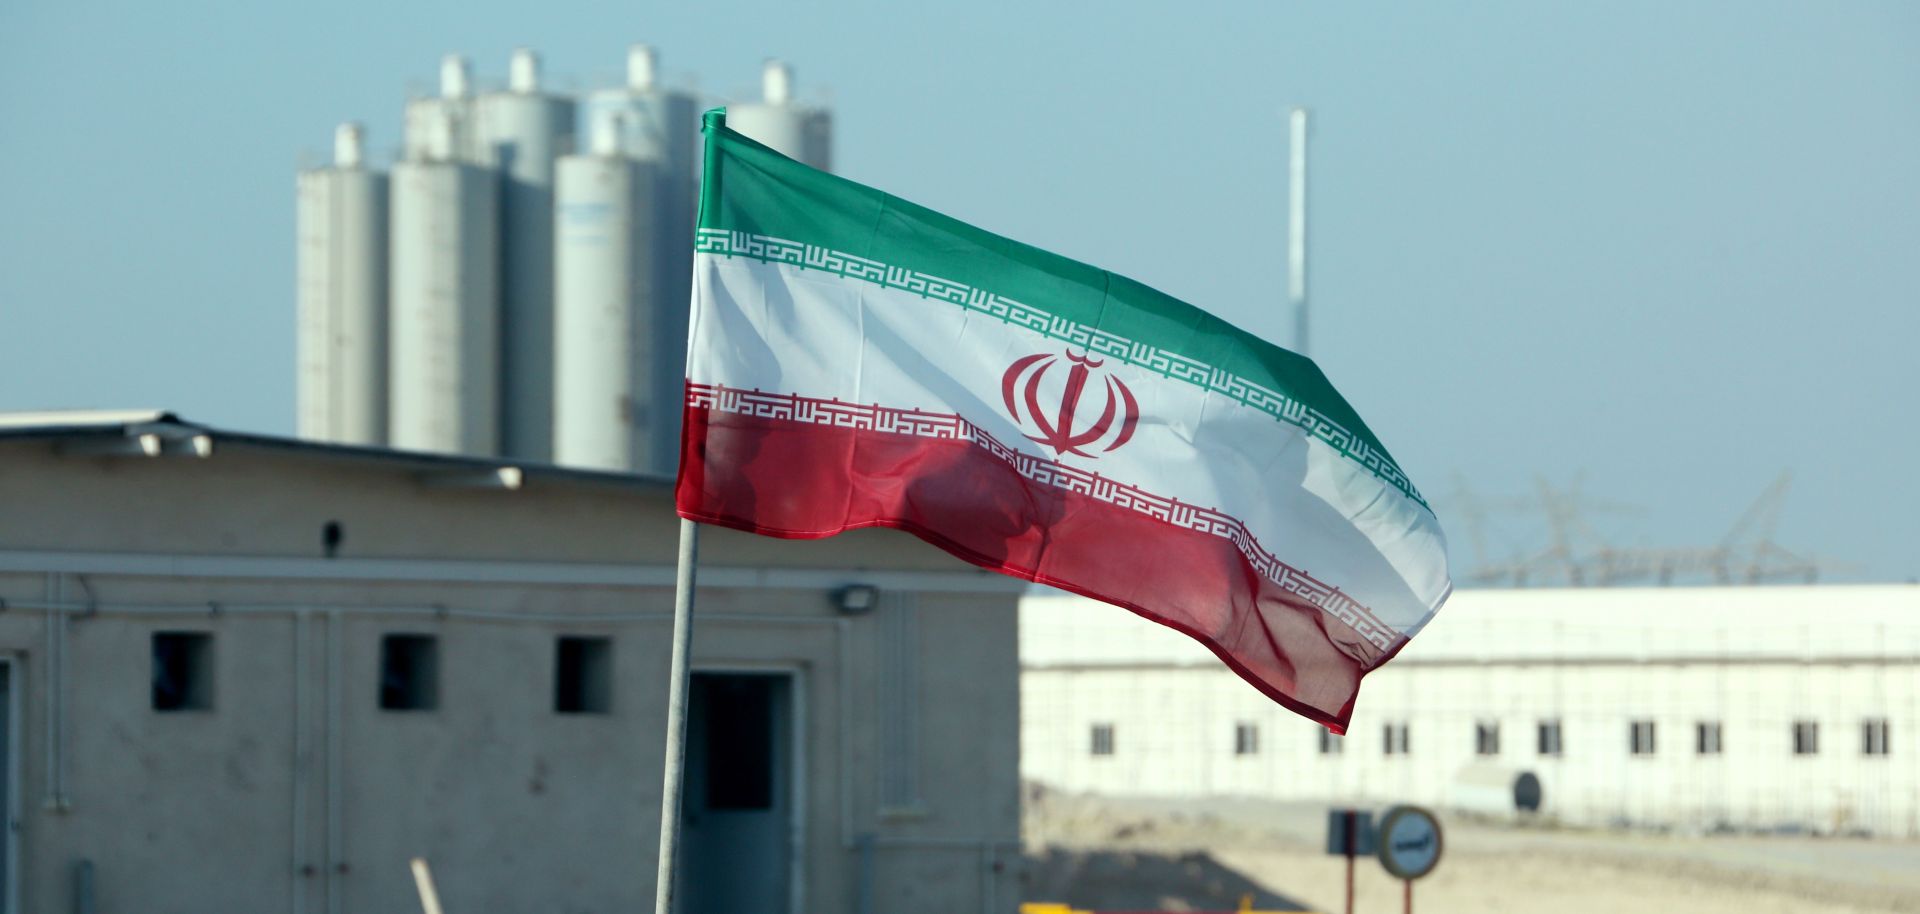 A picture taken on Nov. 10, 2019, shows an Iranian flag at Iran's Bushehr nuclear power plant.